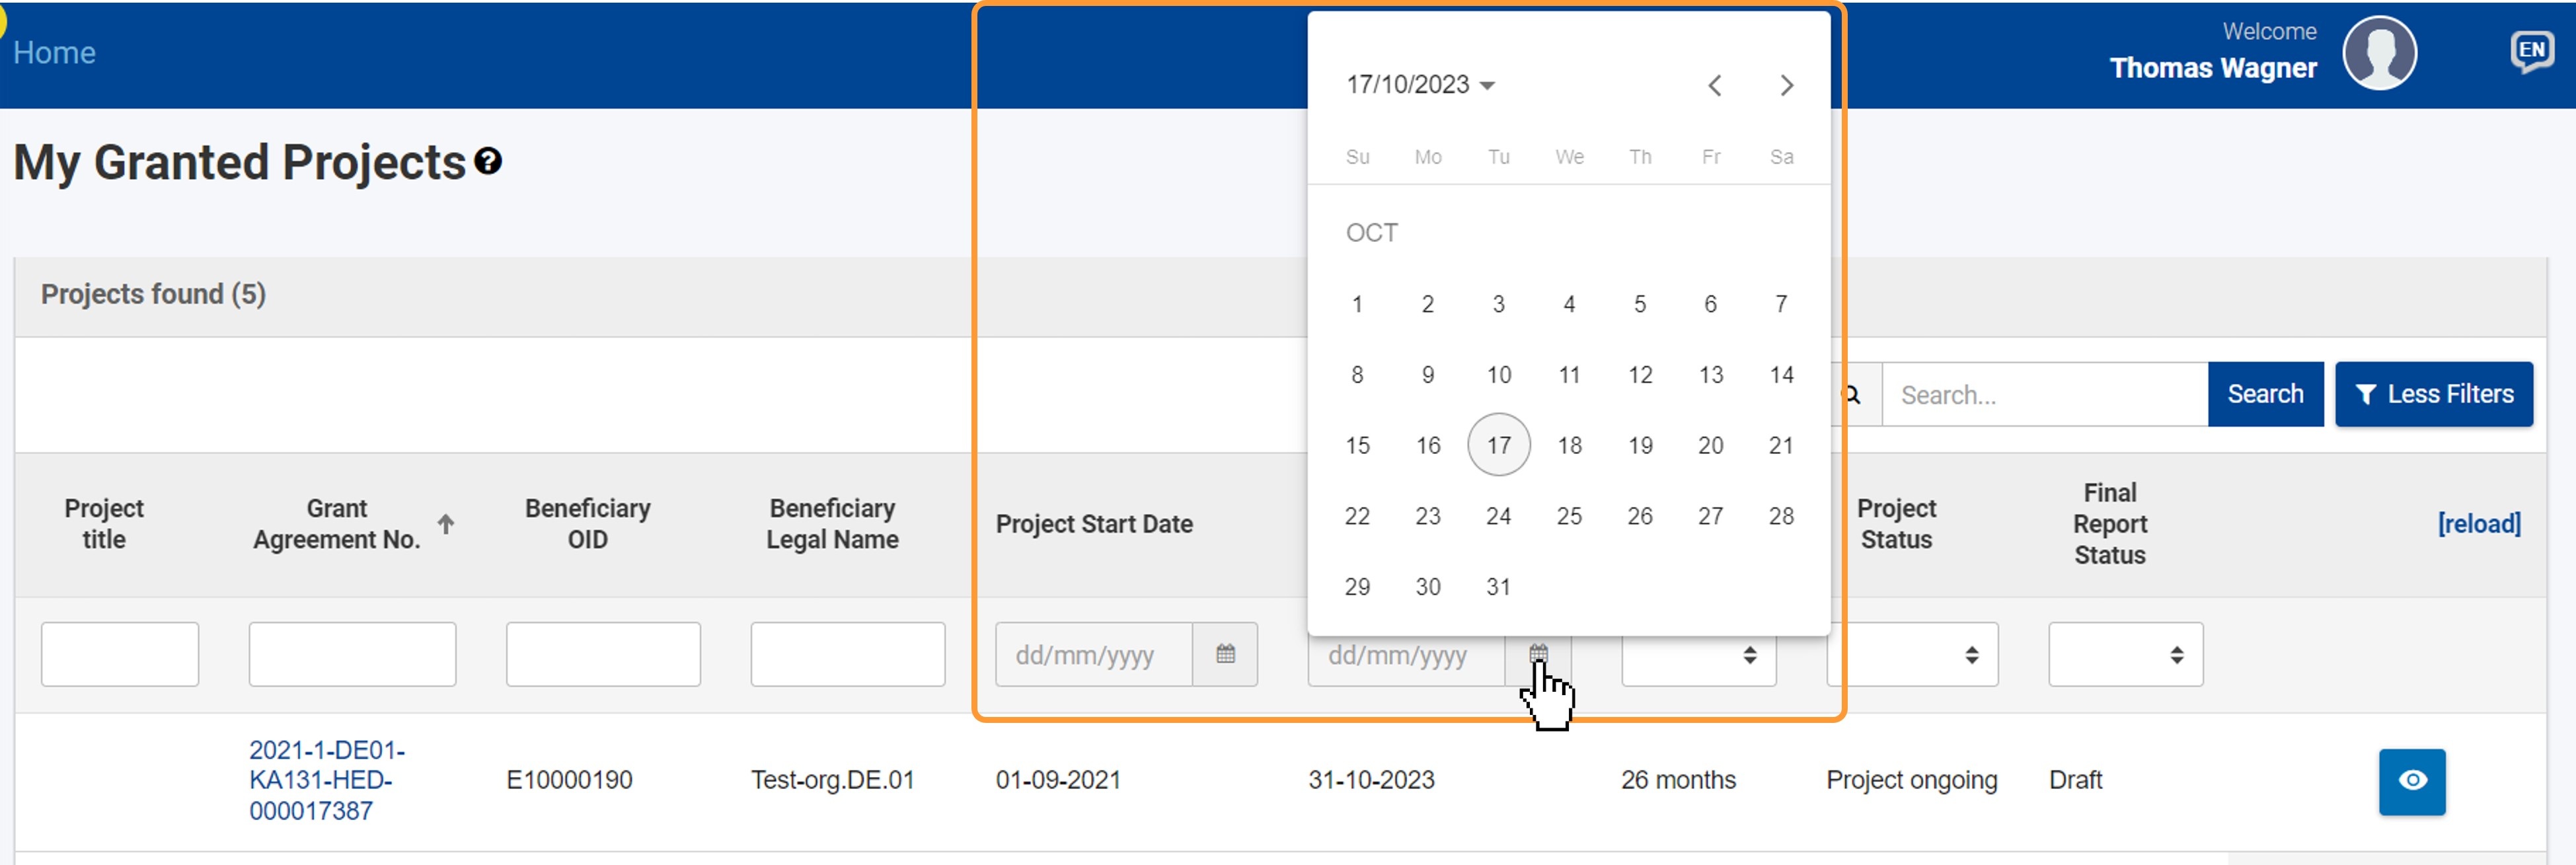 Project Start Date and Project End Date filter